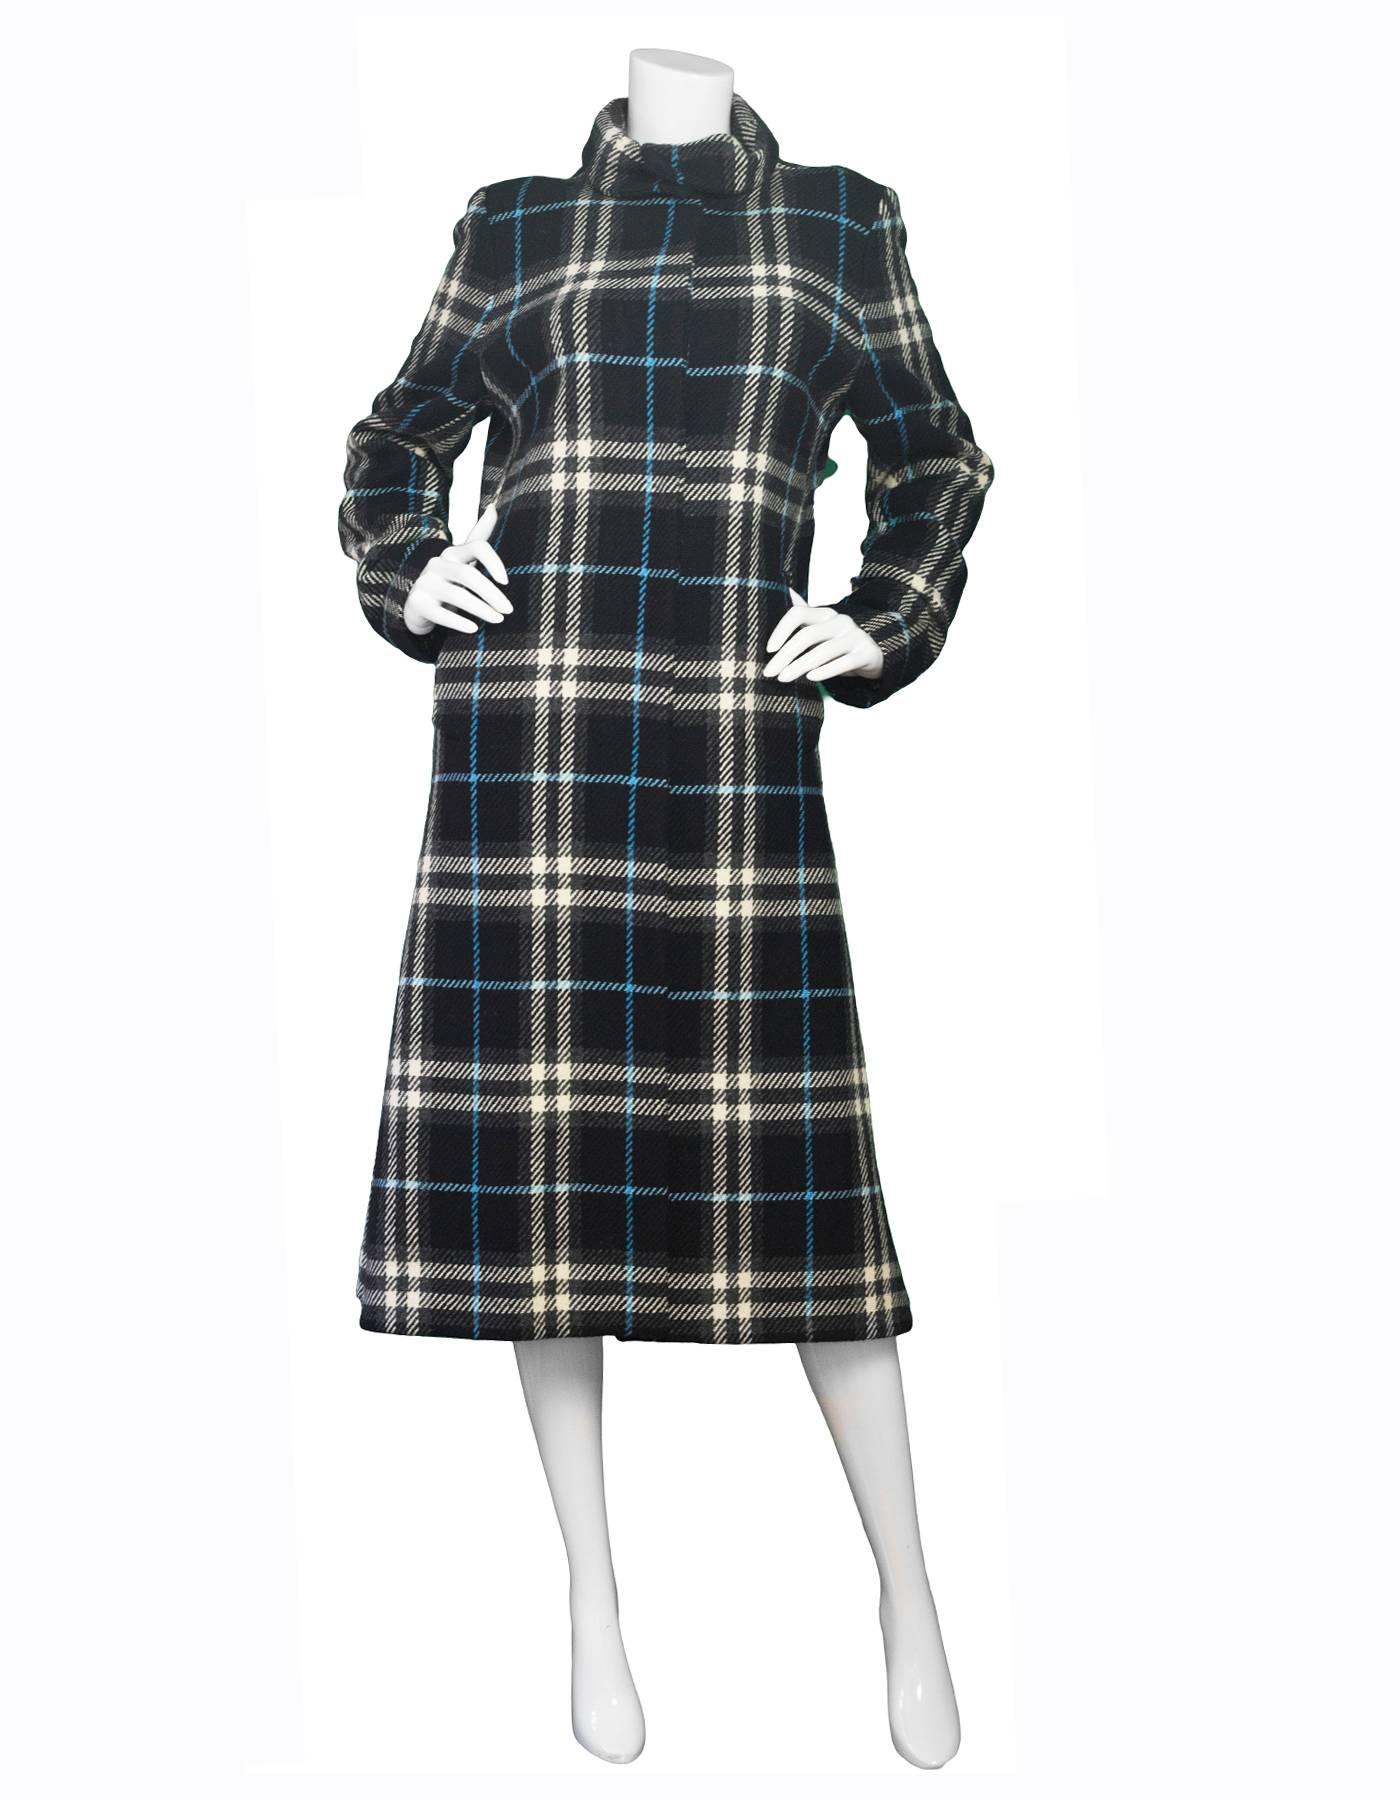 Burberry London Black & Blue Plaid Long Peacoat 

Made In: Italy
Color: Black, blue, white and grey
Composition: 100% lambswool
Lining: Black, 100% rayon viscose 
Closure/Opening: Center button up closure
Exterior Pockets: Two hip